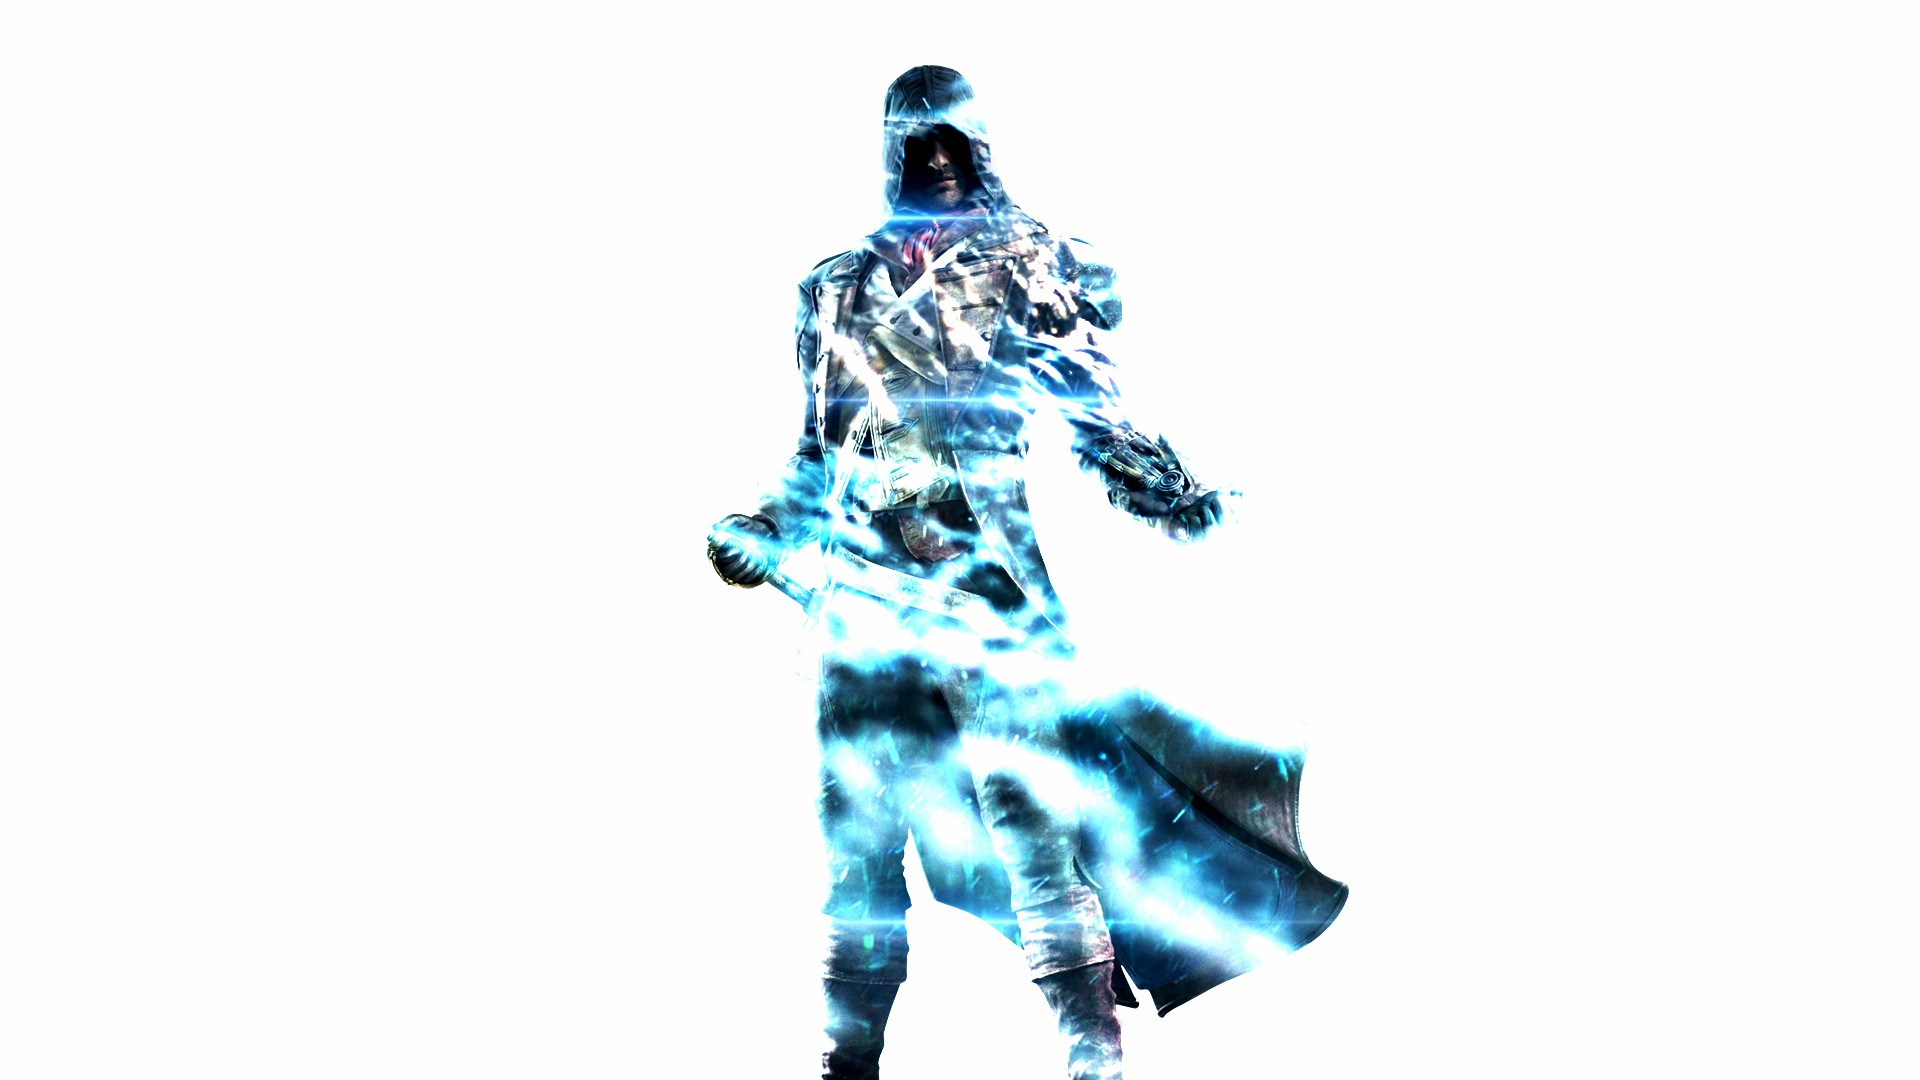 Unity, Assassins Creed, Double exposure, Water, Flares, White background, 2D, Digital art, Arno Dorian Wallpaper